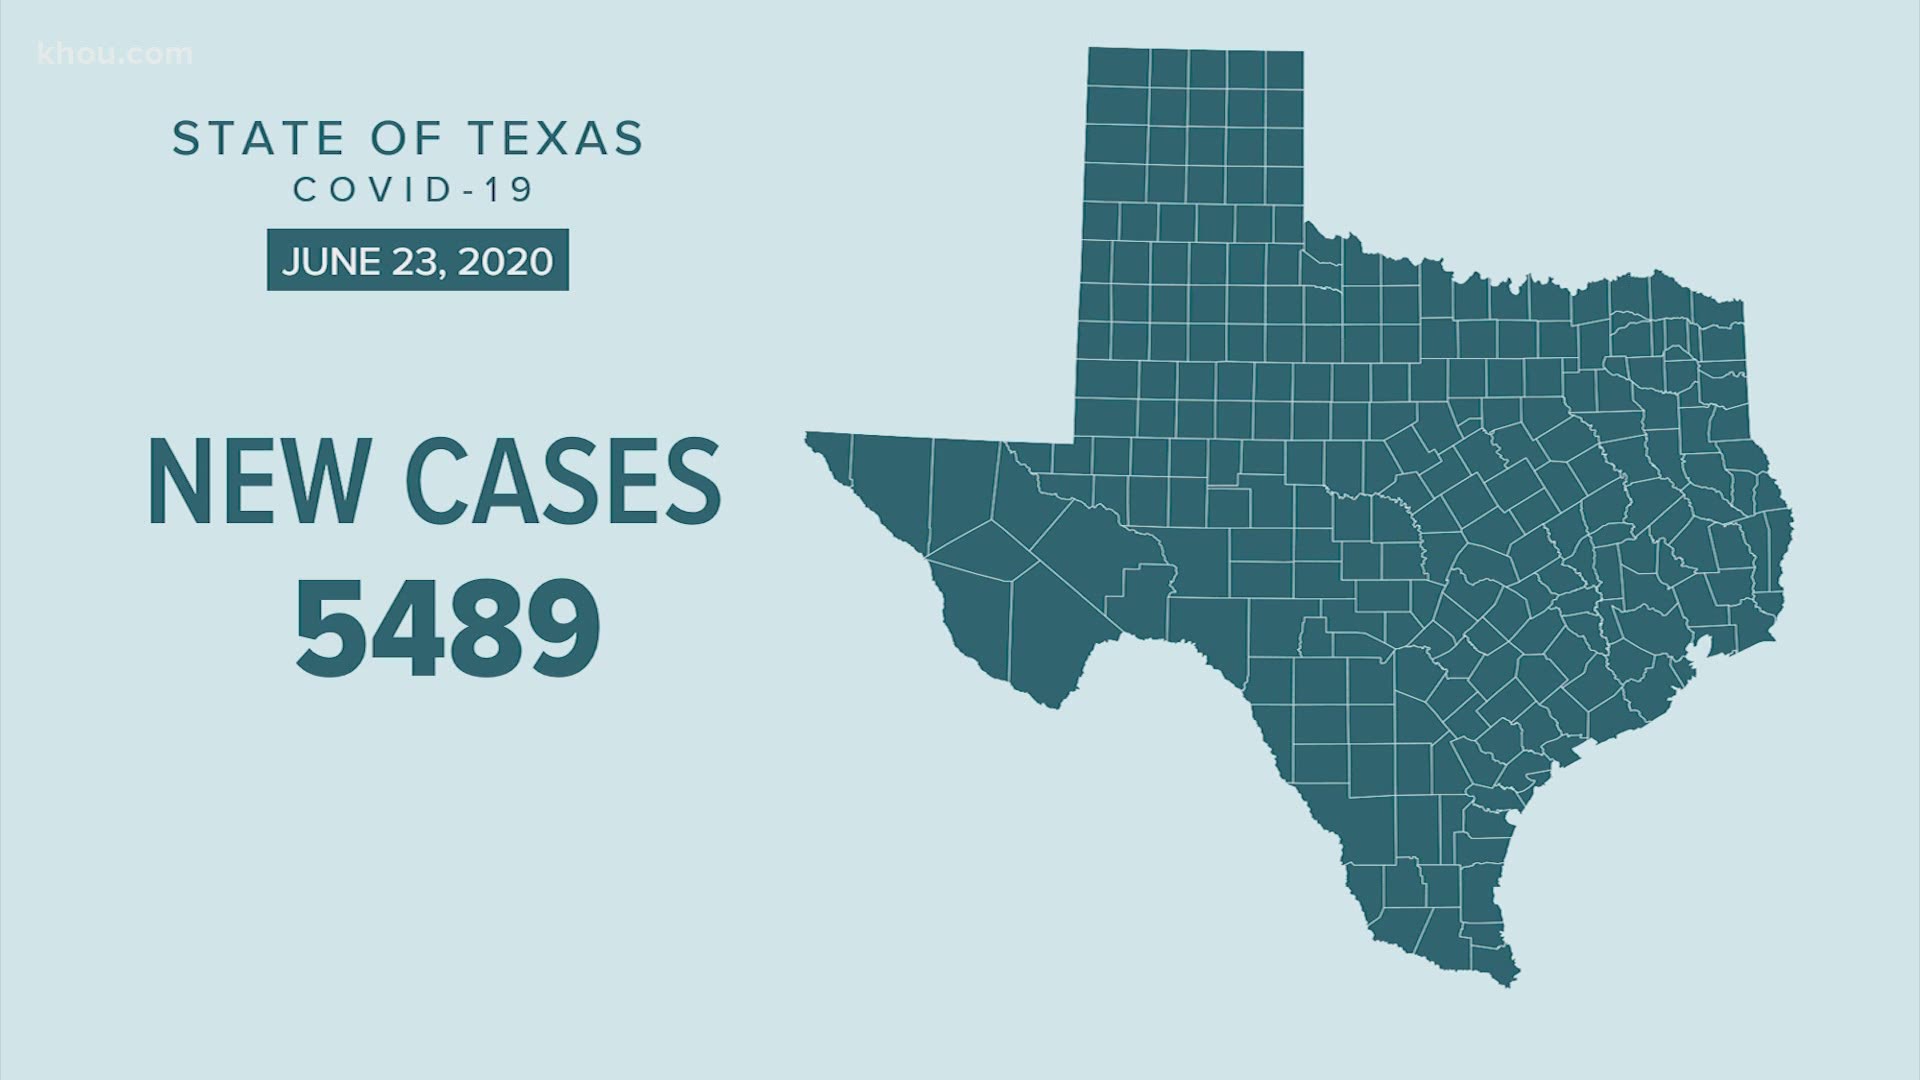 Texas among 25 states reporting a spike in COVID-19 cases. Harris County COVID-19 Relief Fund accepting applications. Other COVID-19 news for Wednesday, June 24.